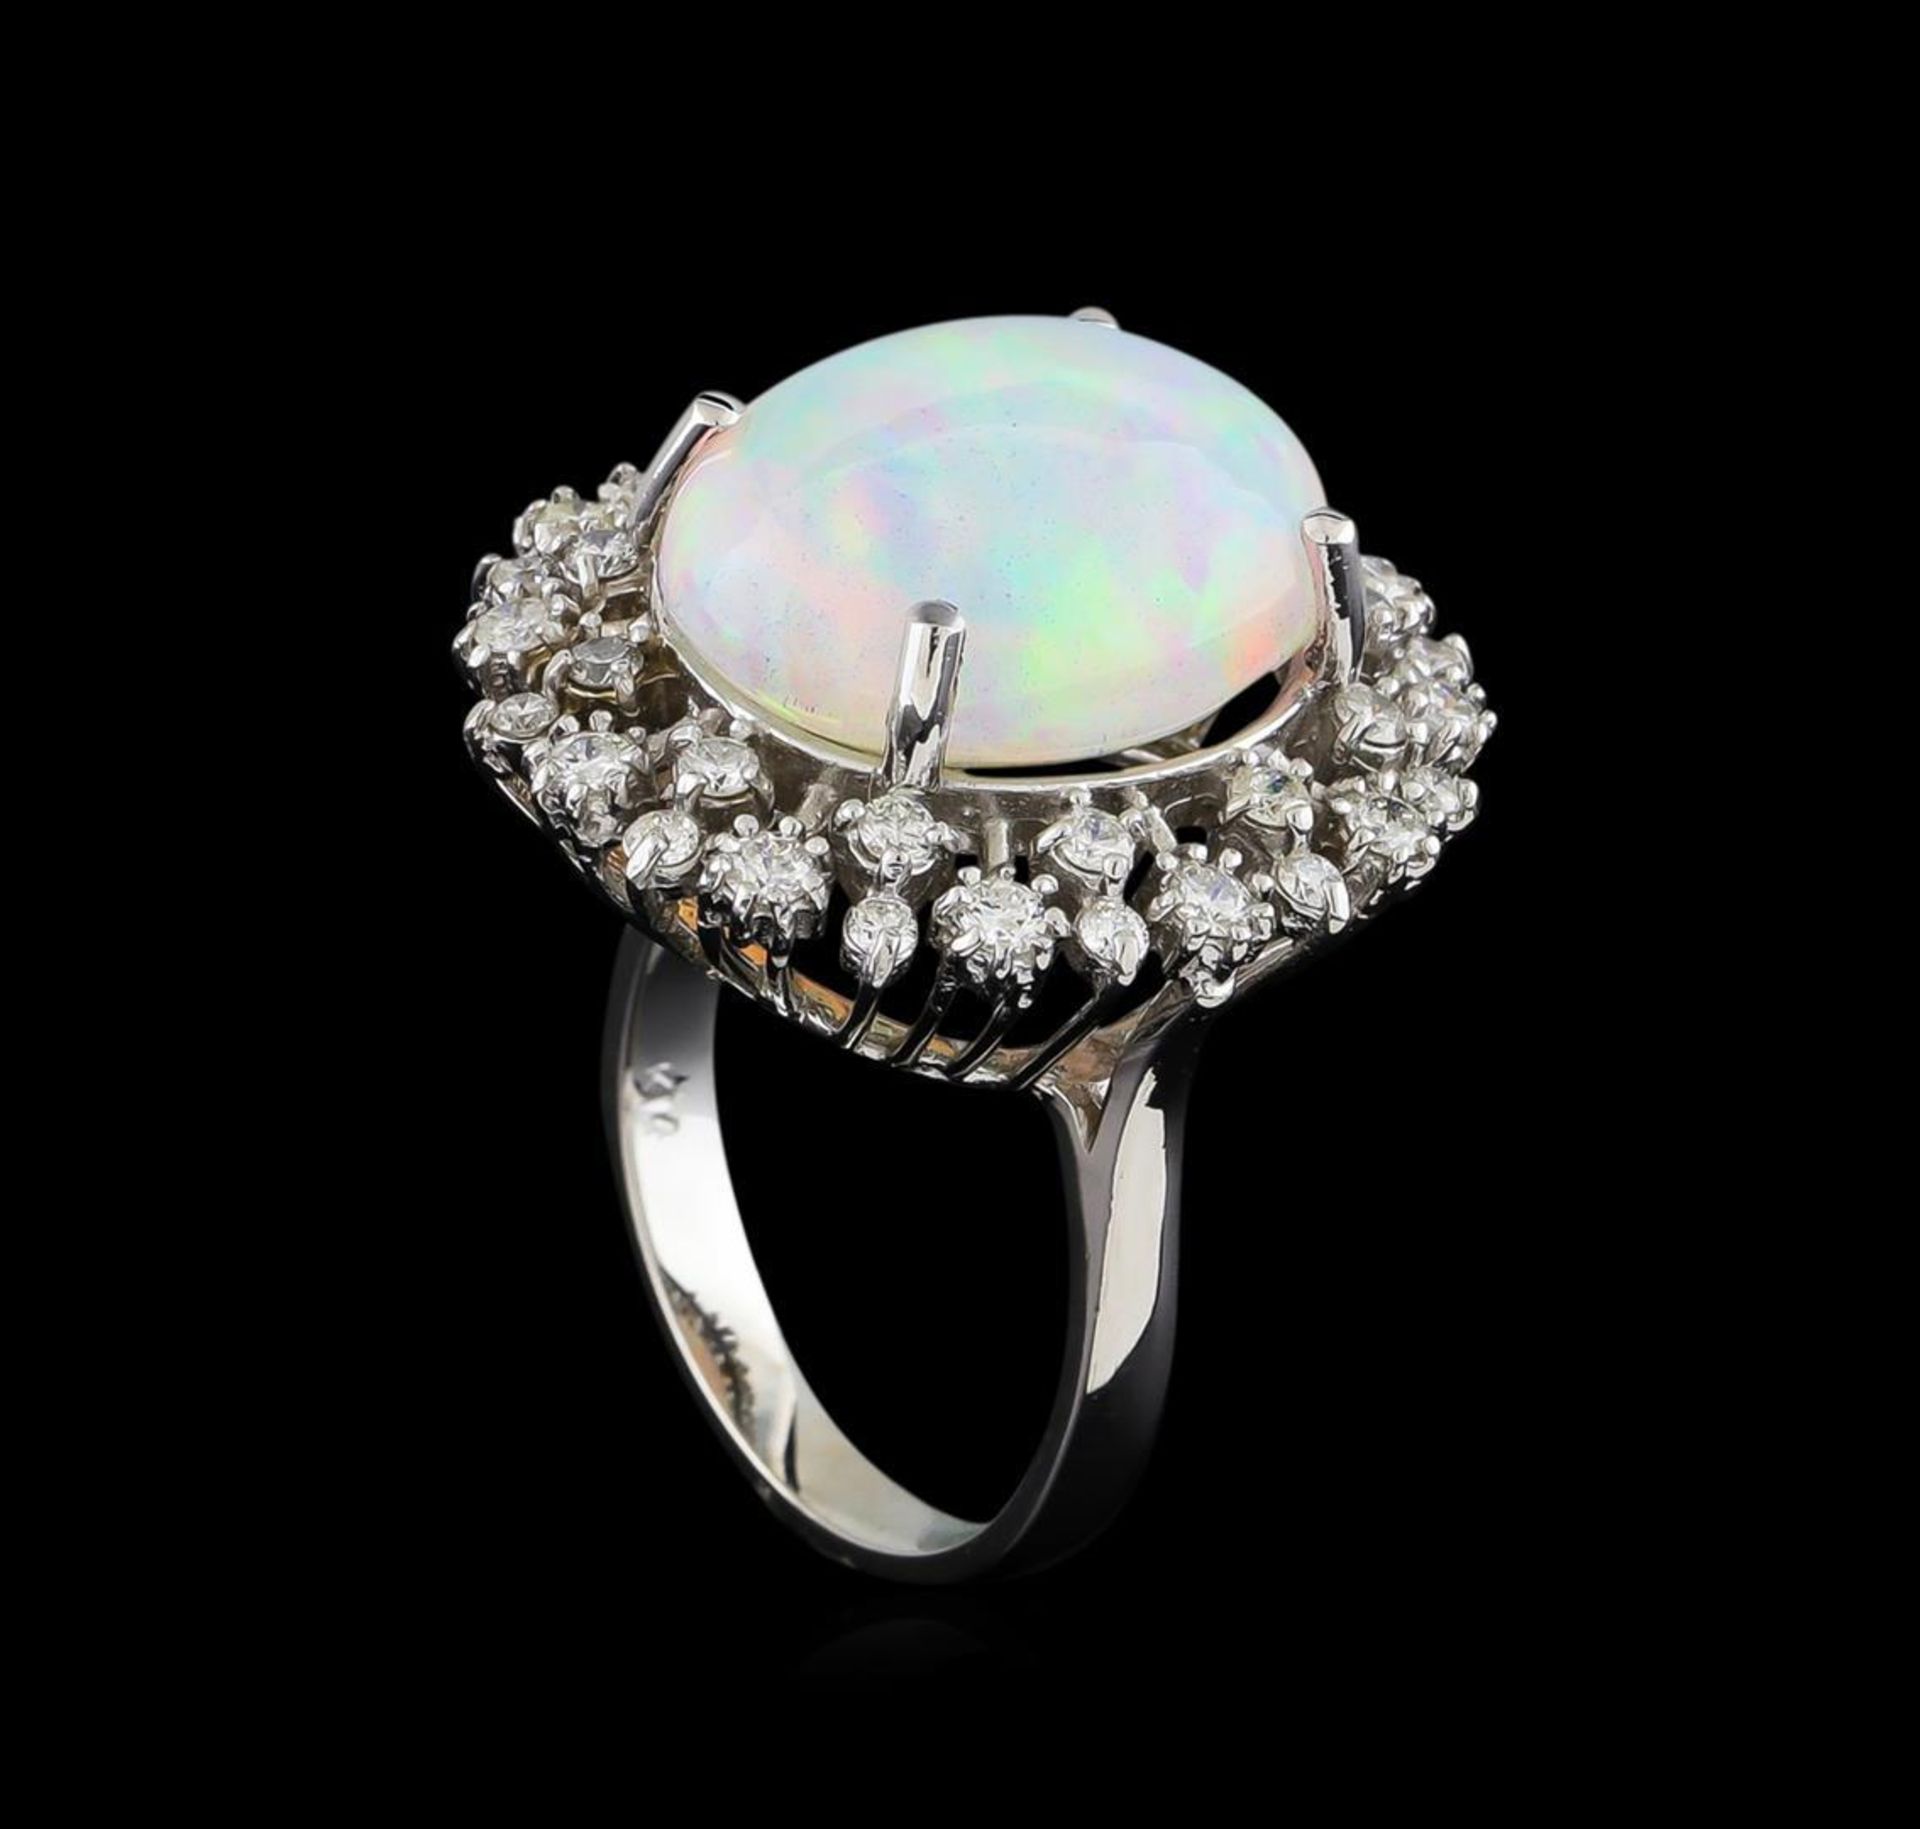 11.69 ctw Opal and Diamond Ring - 14KT White Gold - Image 4 of 5